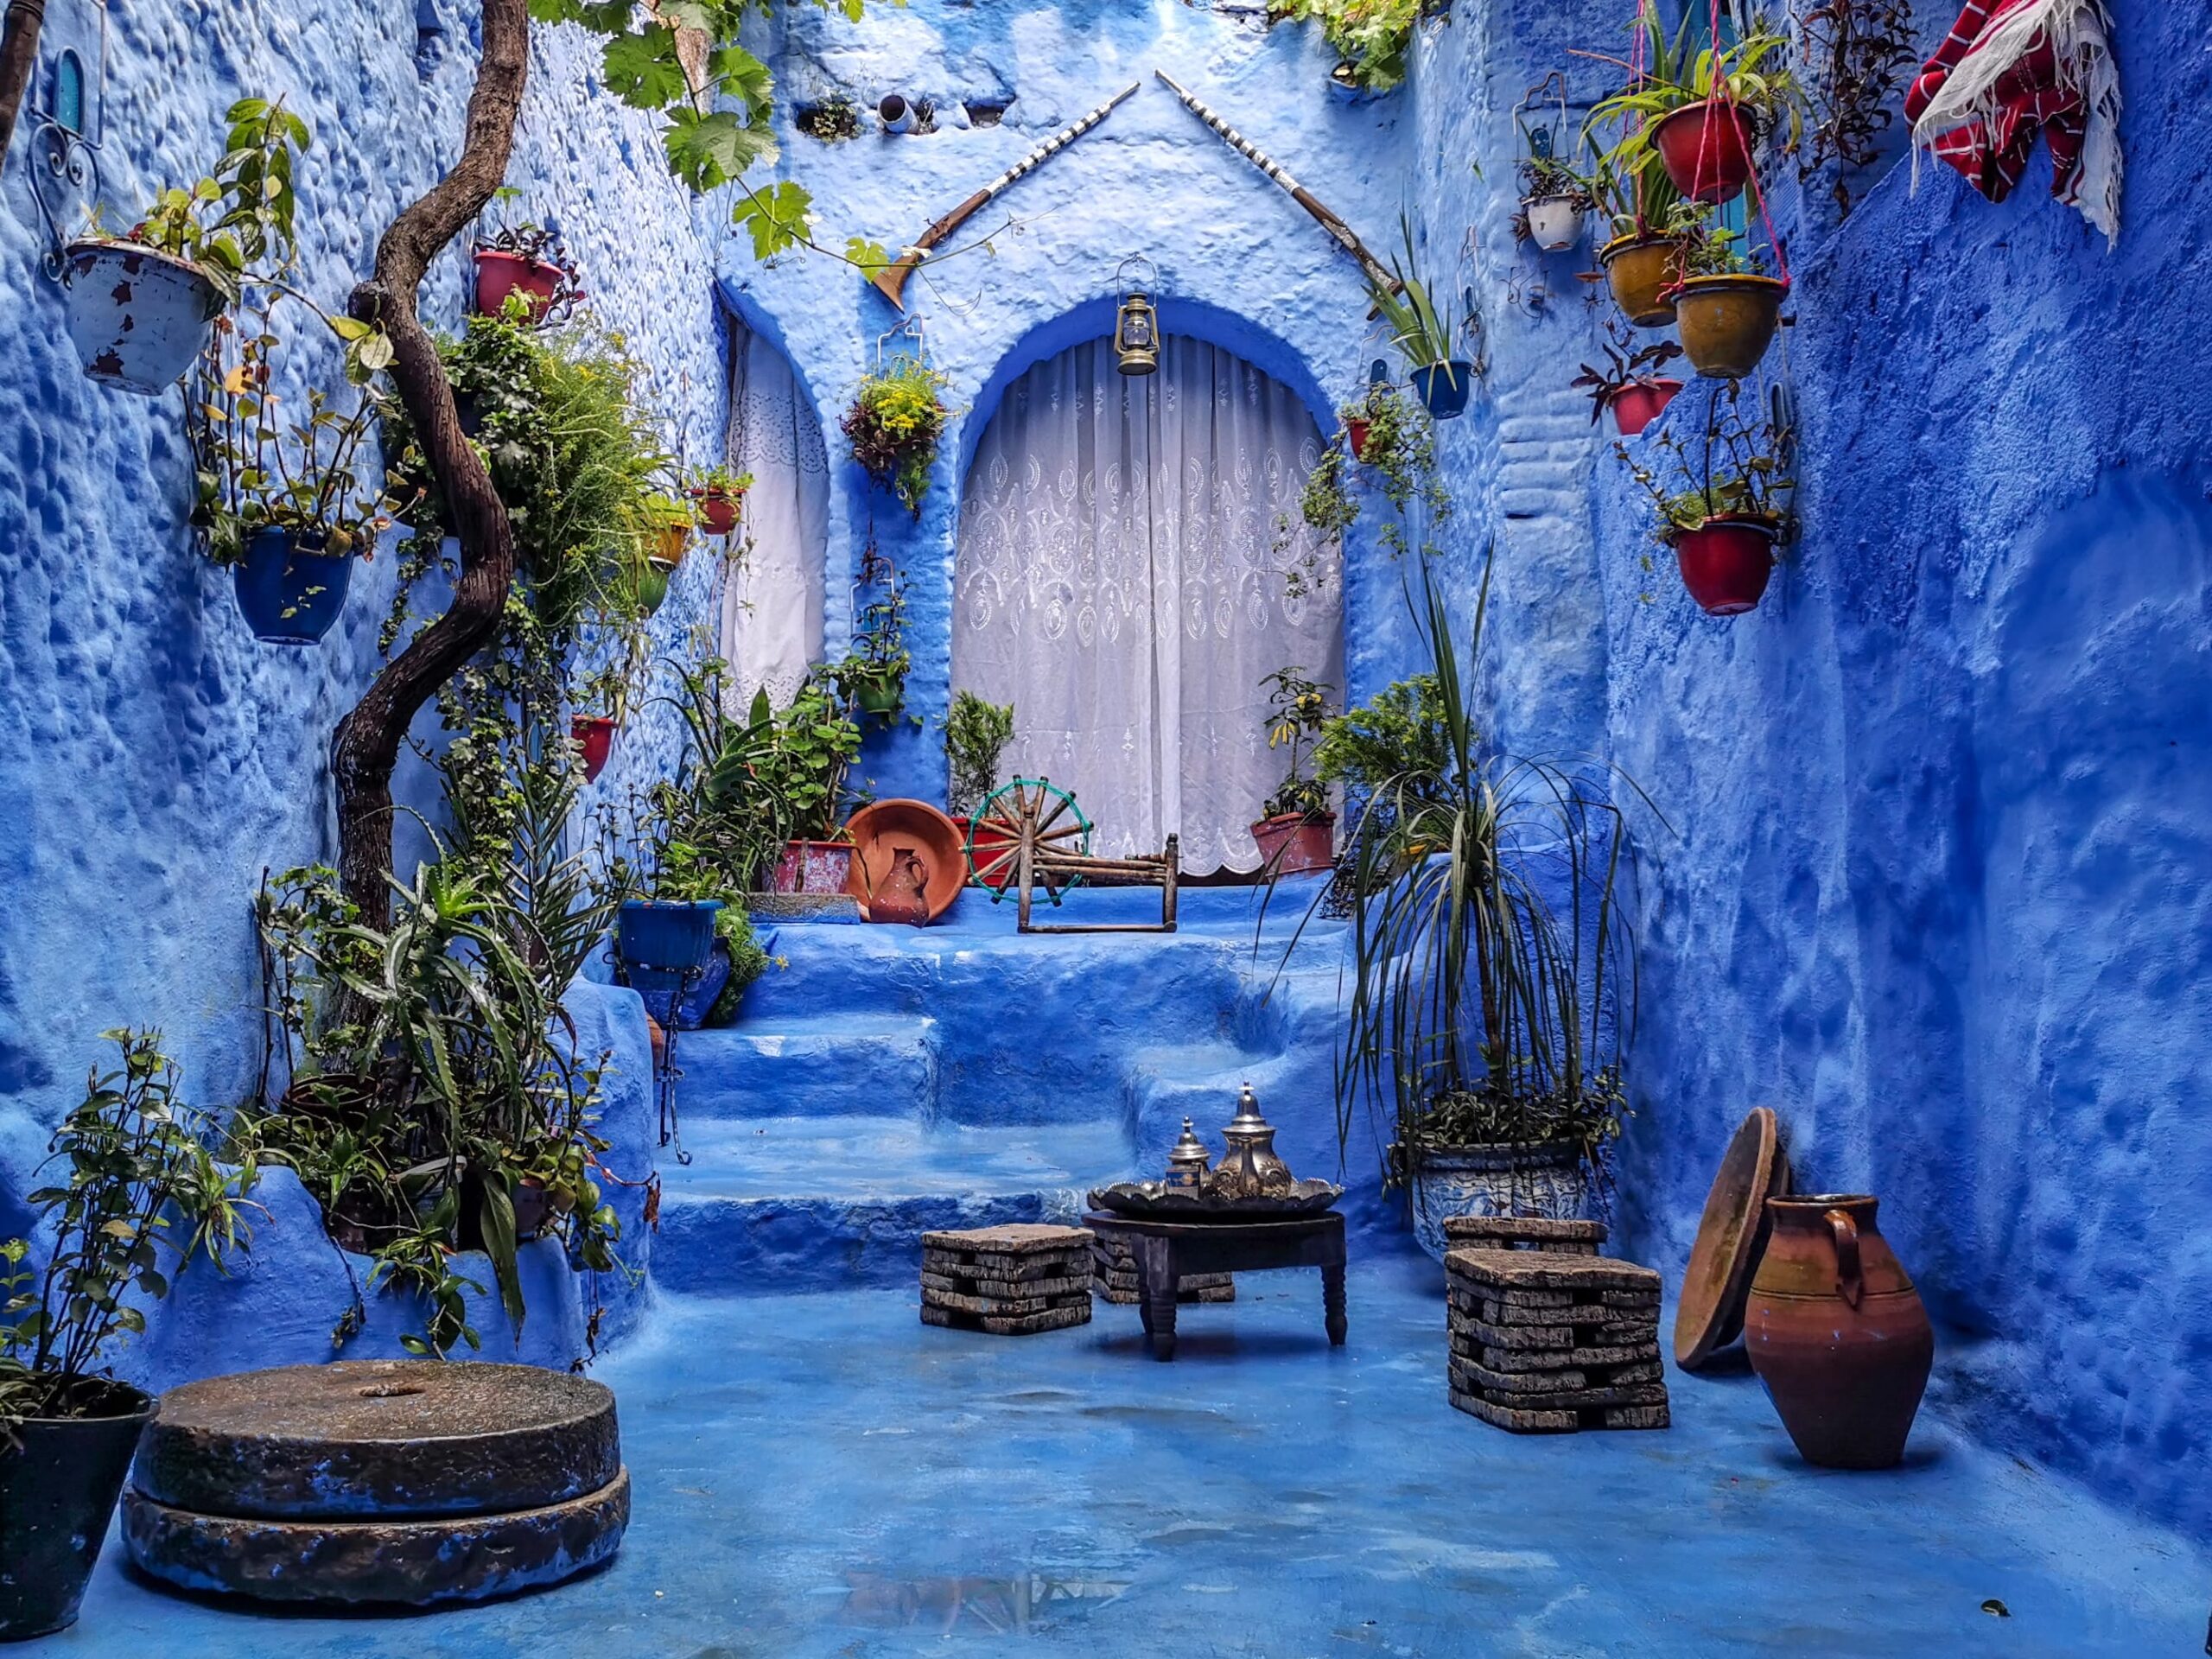 Shot after the rain in the beautiful city of Chefchaouen, Morocco